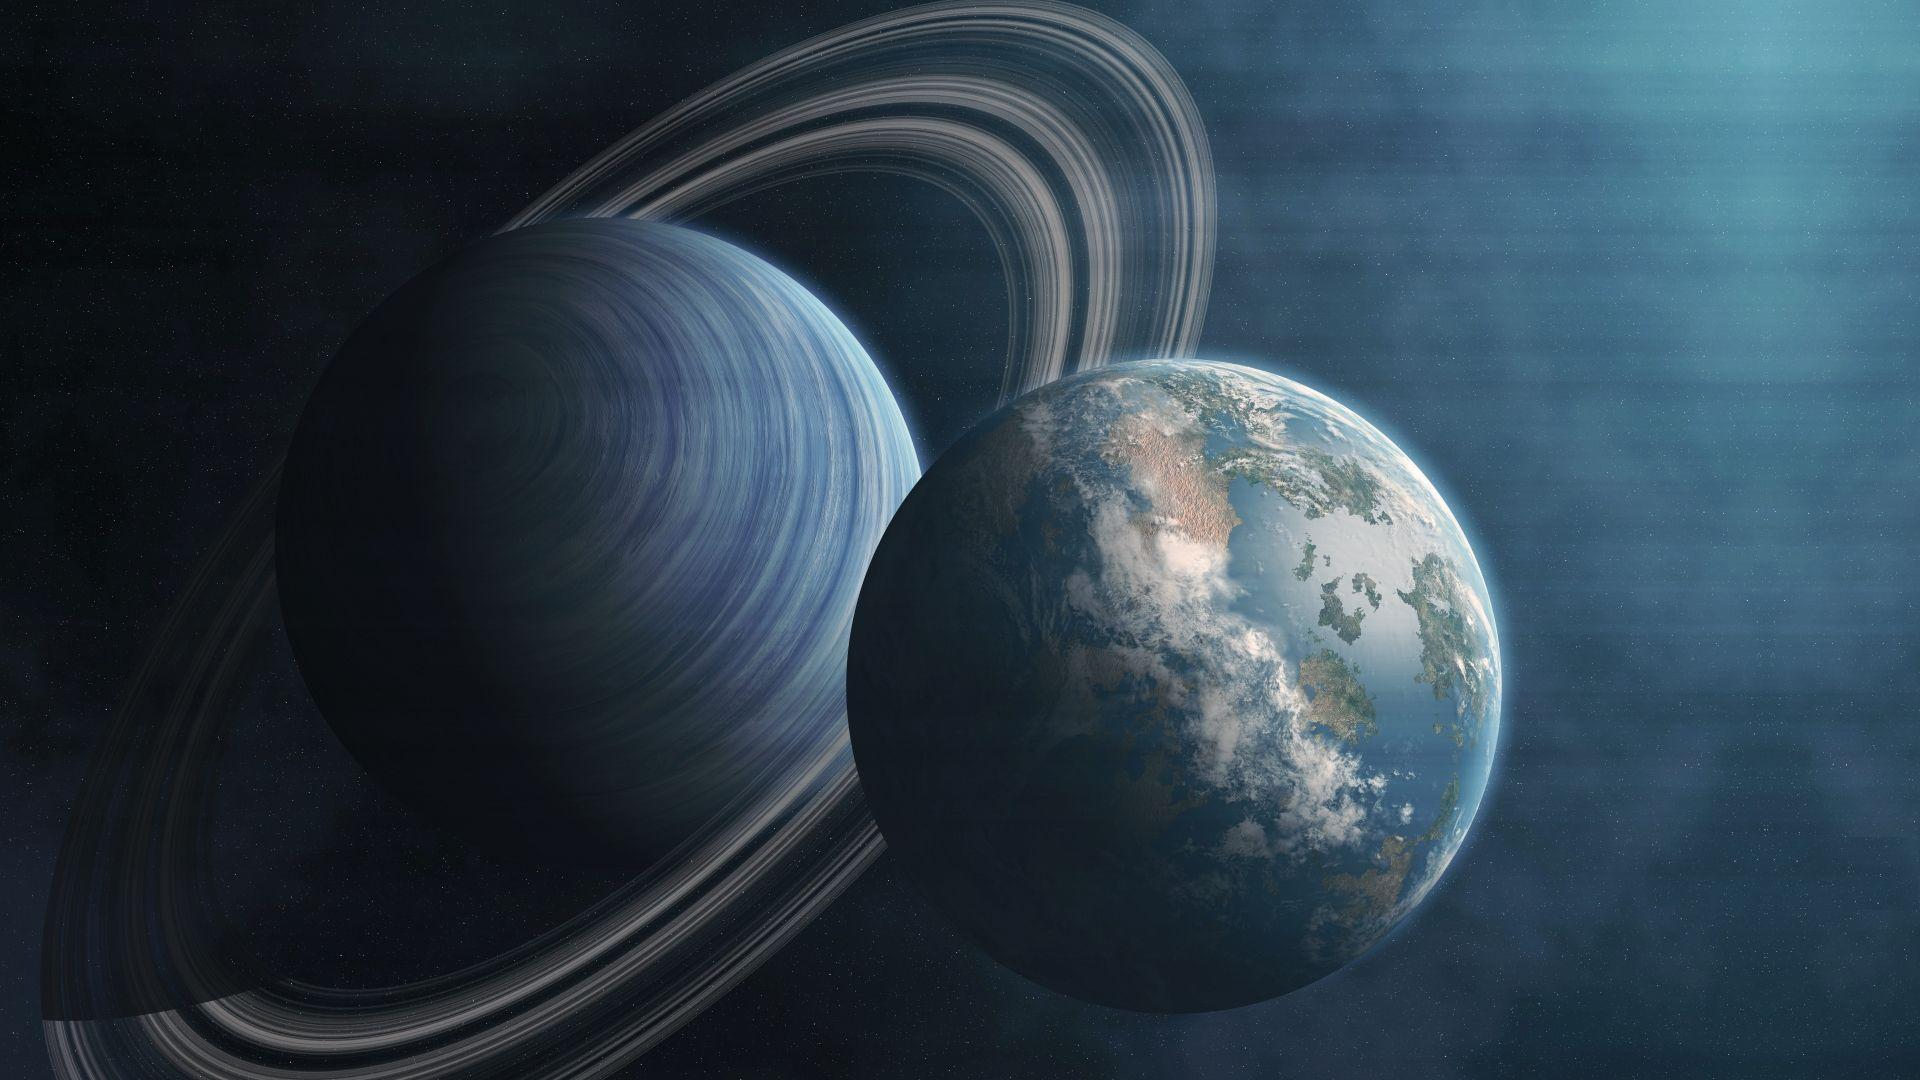 Planet Earth and Saturn in the universe wallpaper download